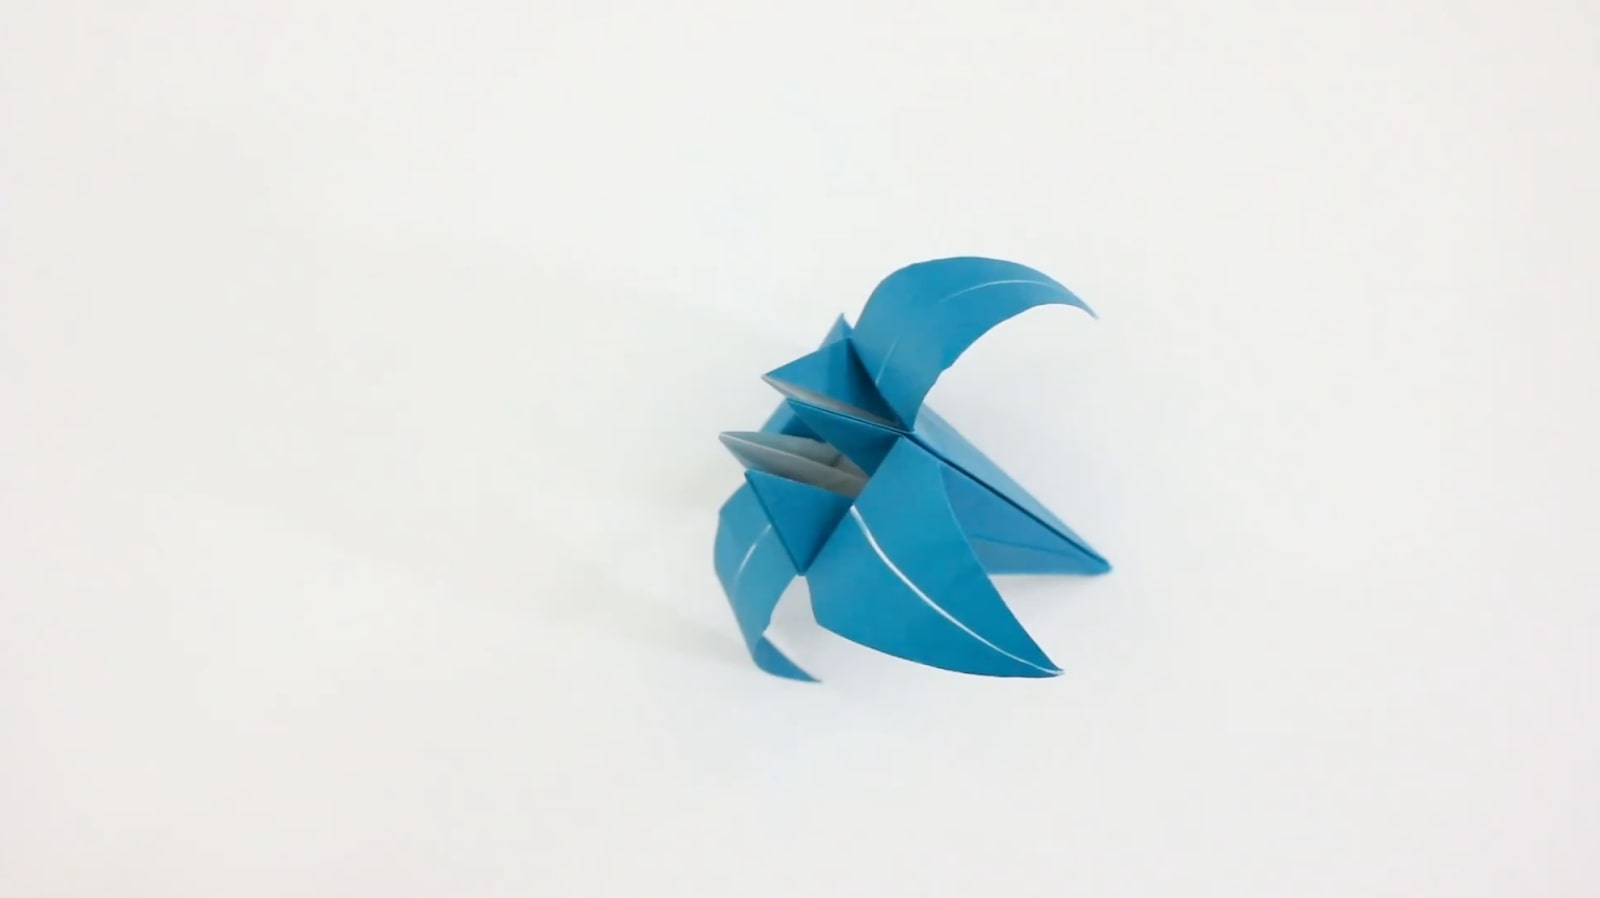 How To Make An Origami Lotus Flower - Folding Instructions - Origami Guide